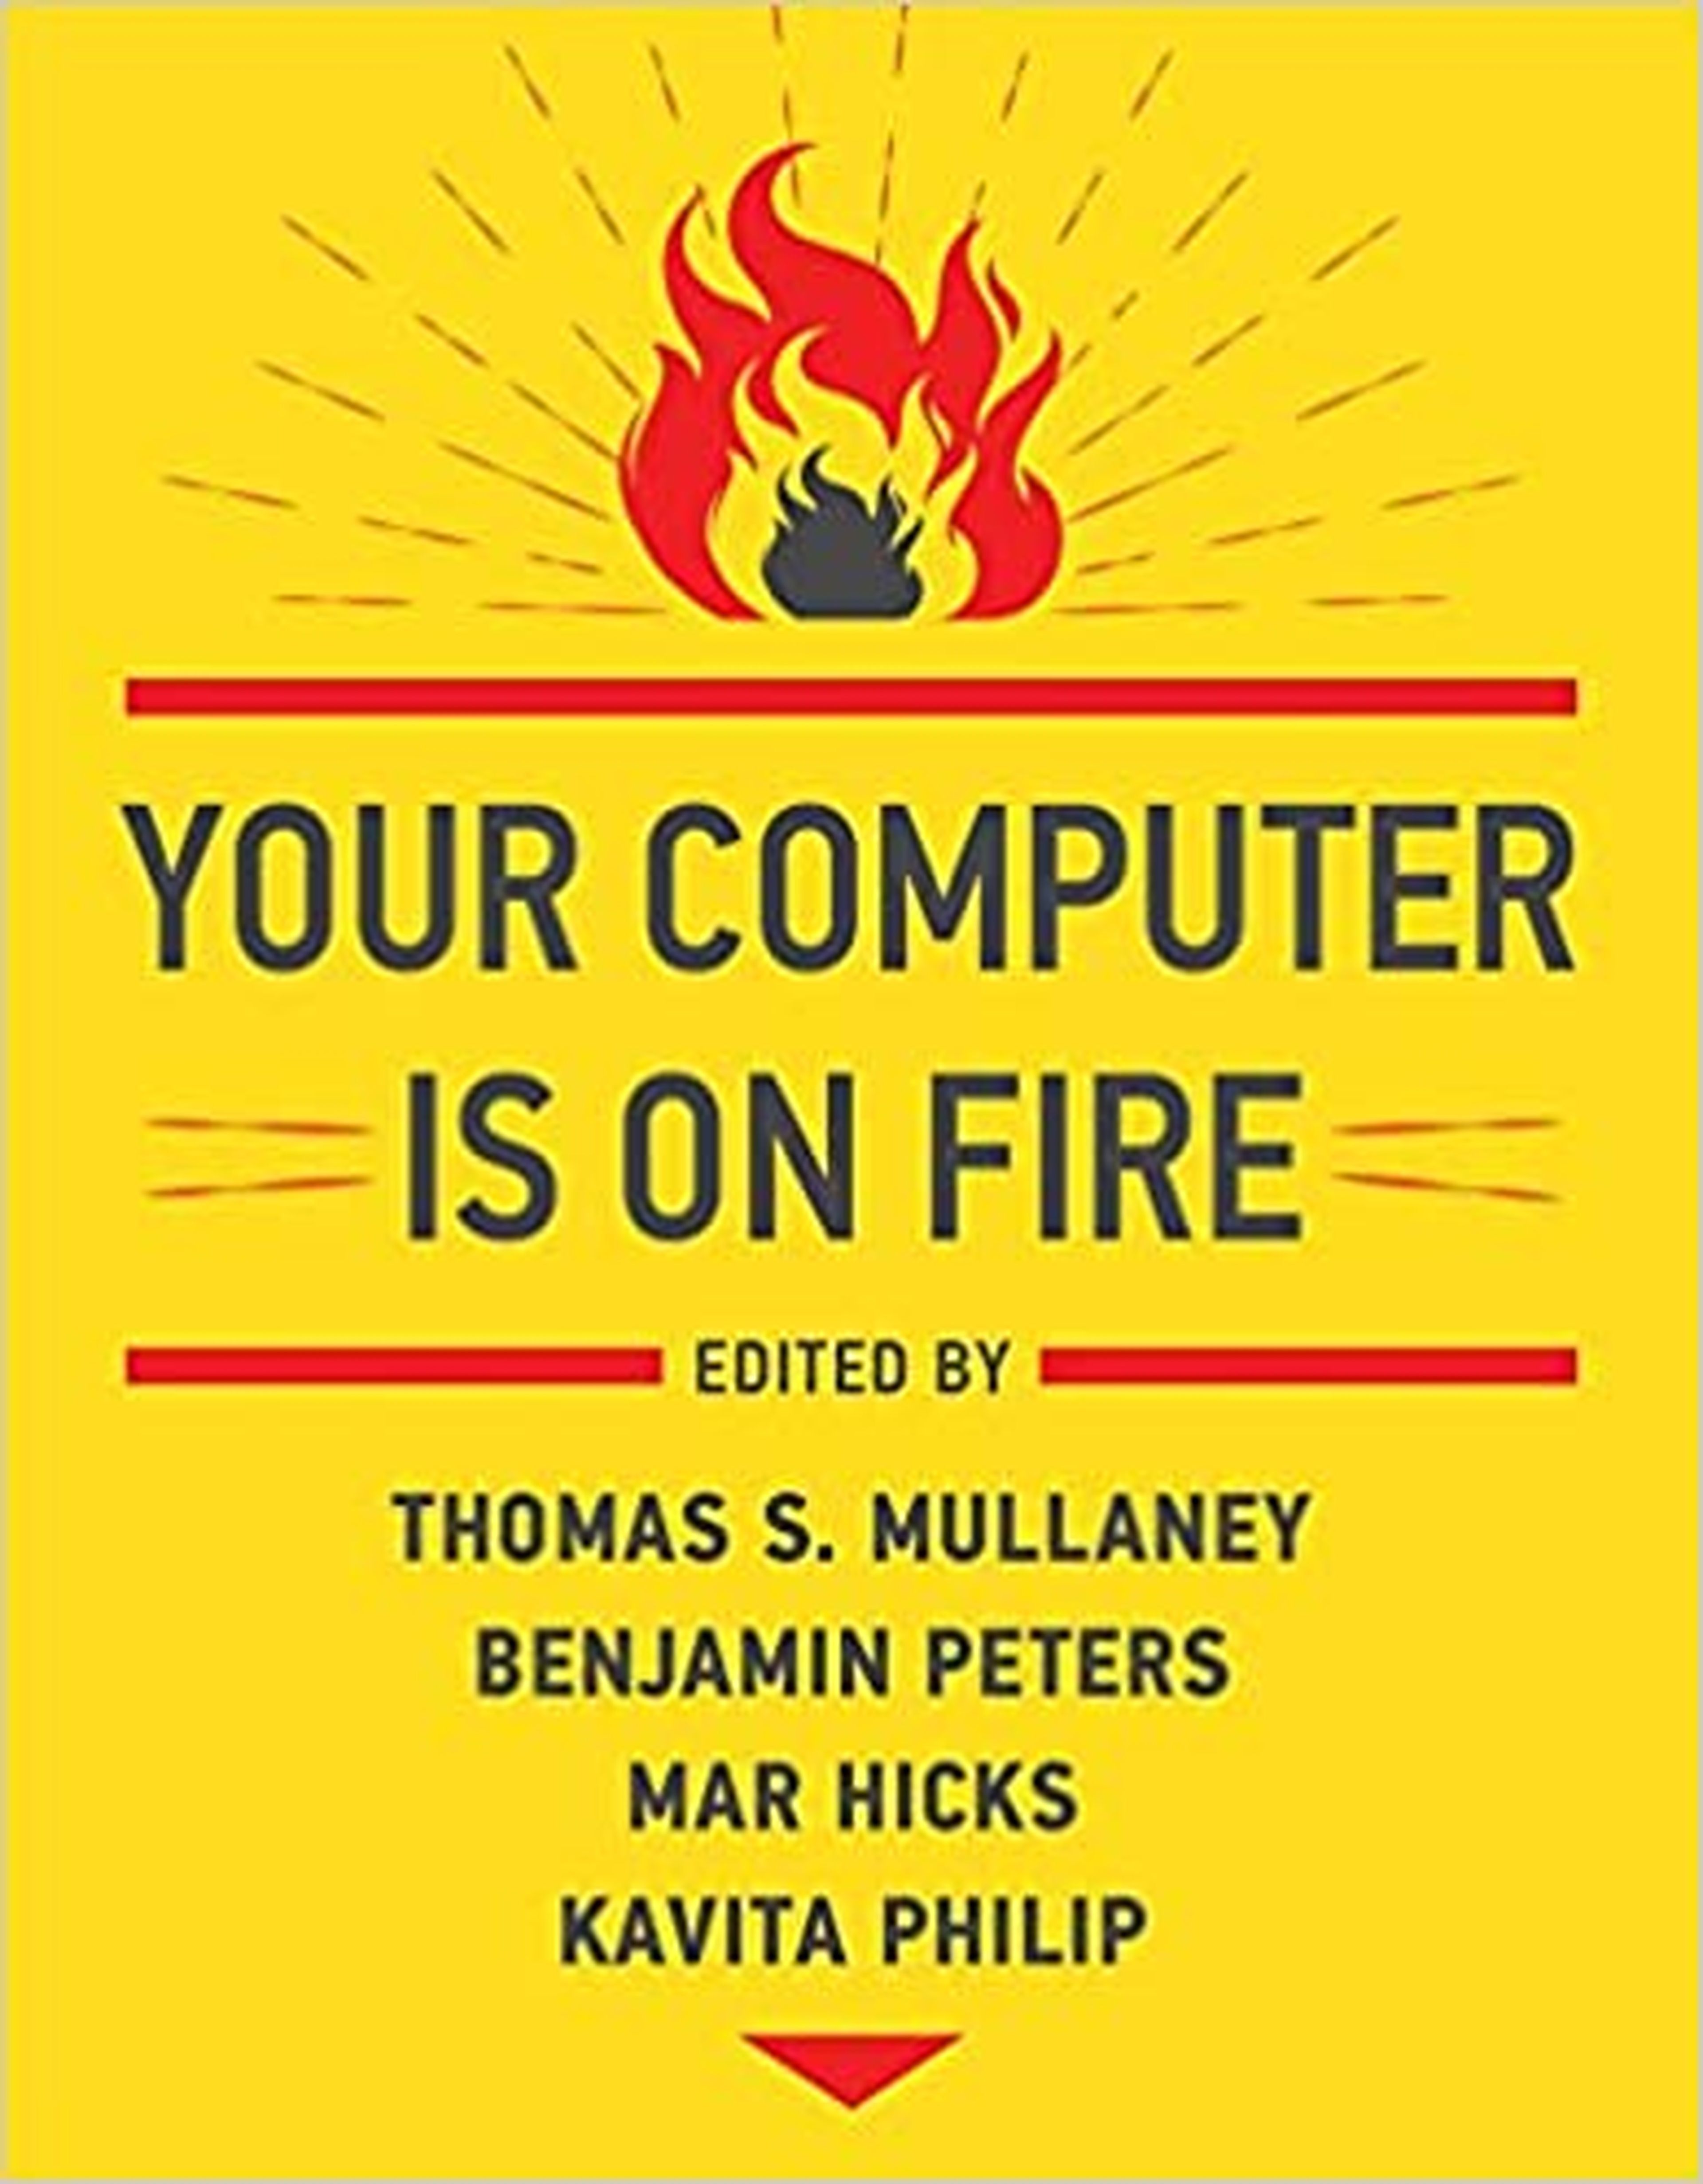 'Your Computer is On Fire'